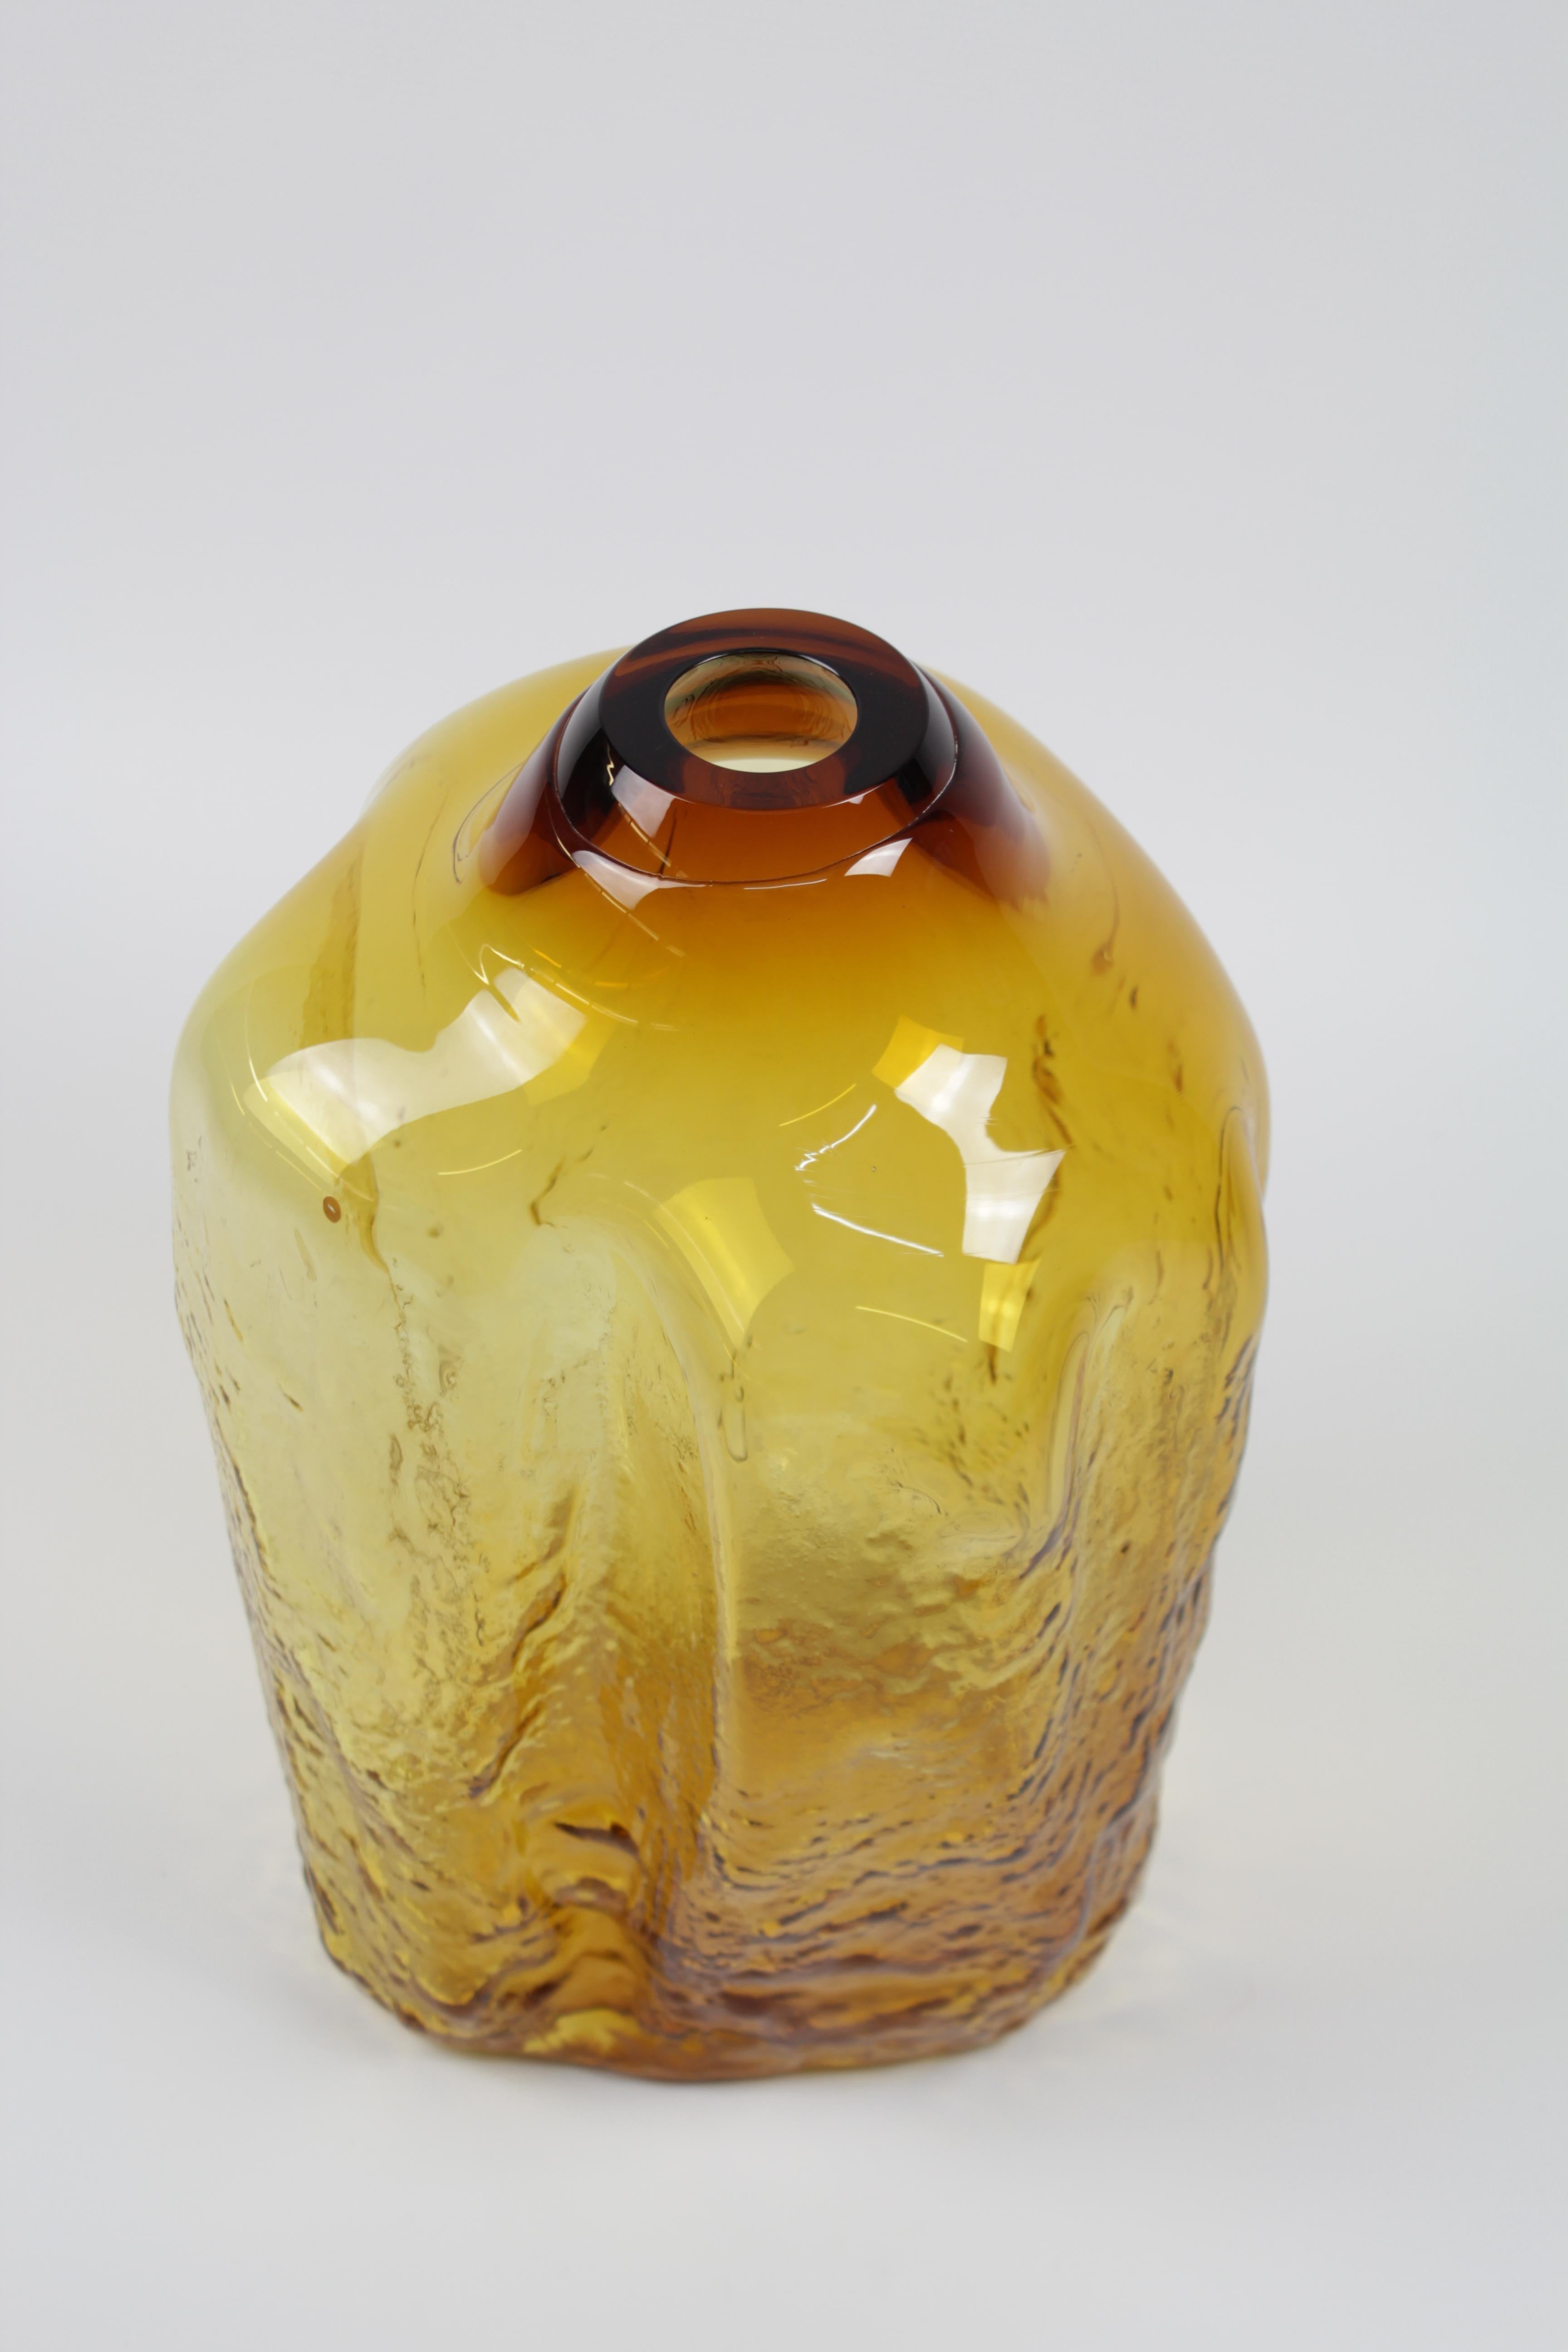 Sand Series, Brilliant Gold, Handmade Glass Object by Vogel Studio For Sale 2